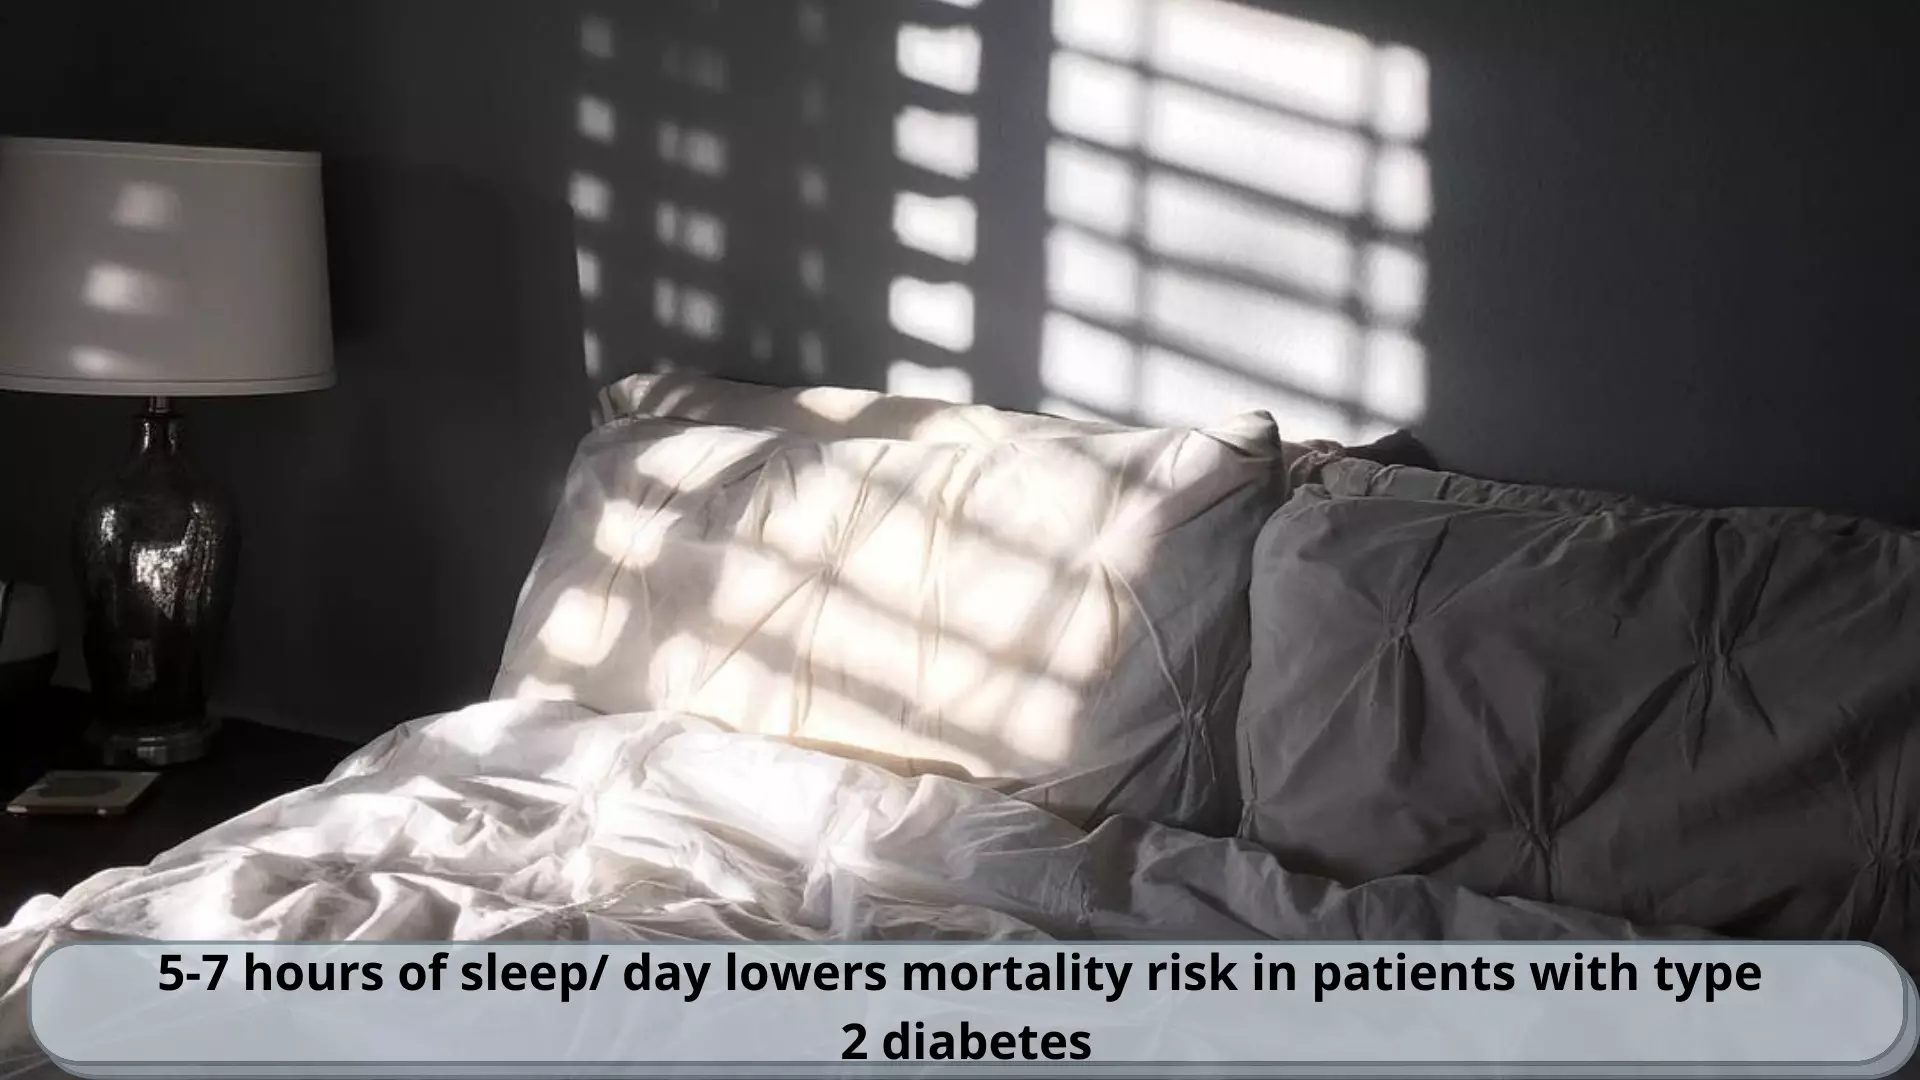 5-7 hours of sleep/ day lowers mortality risk in patients with type 2 diabetes